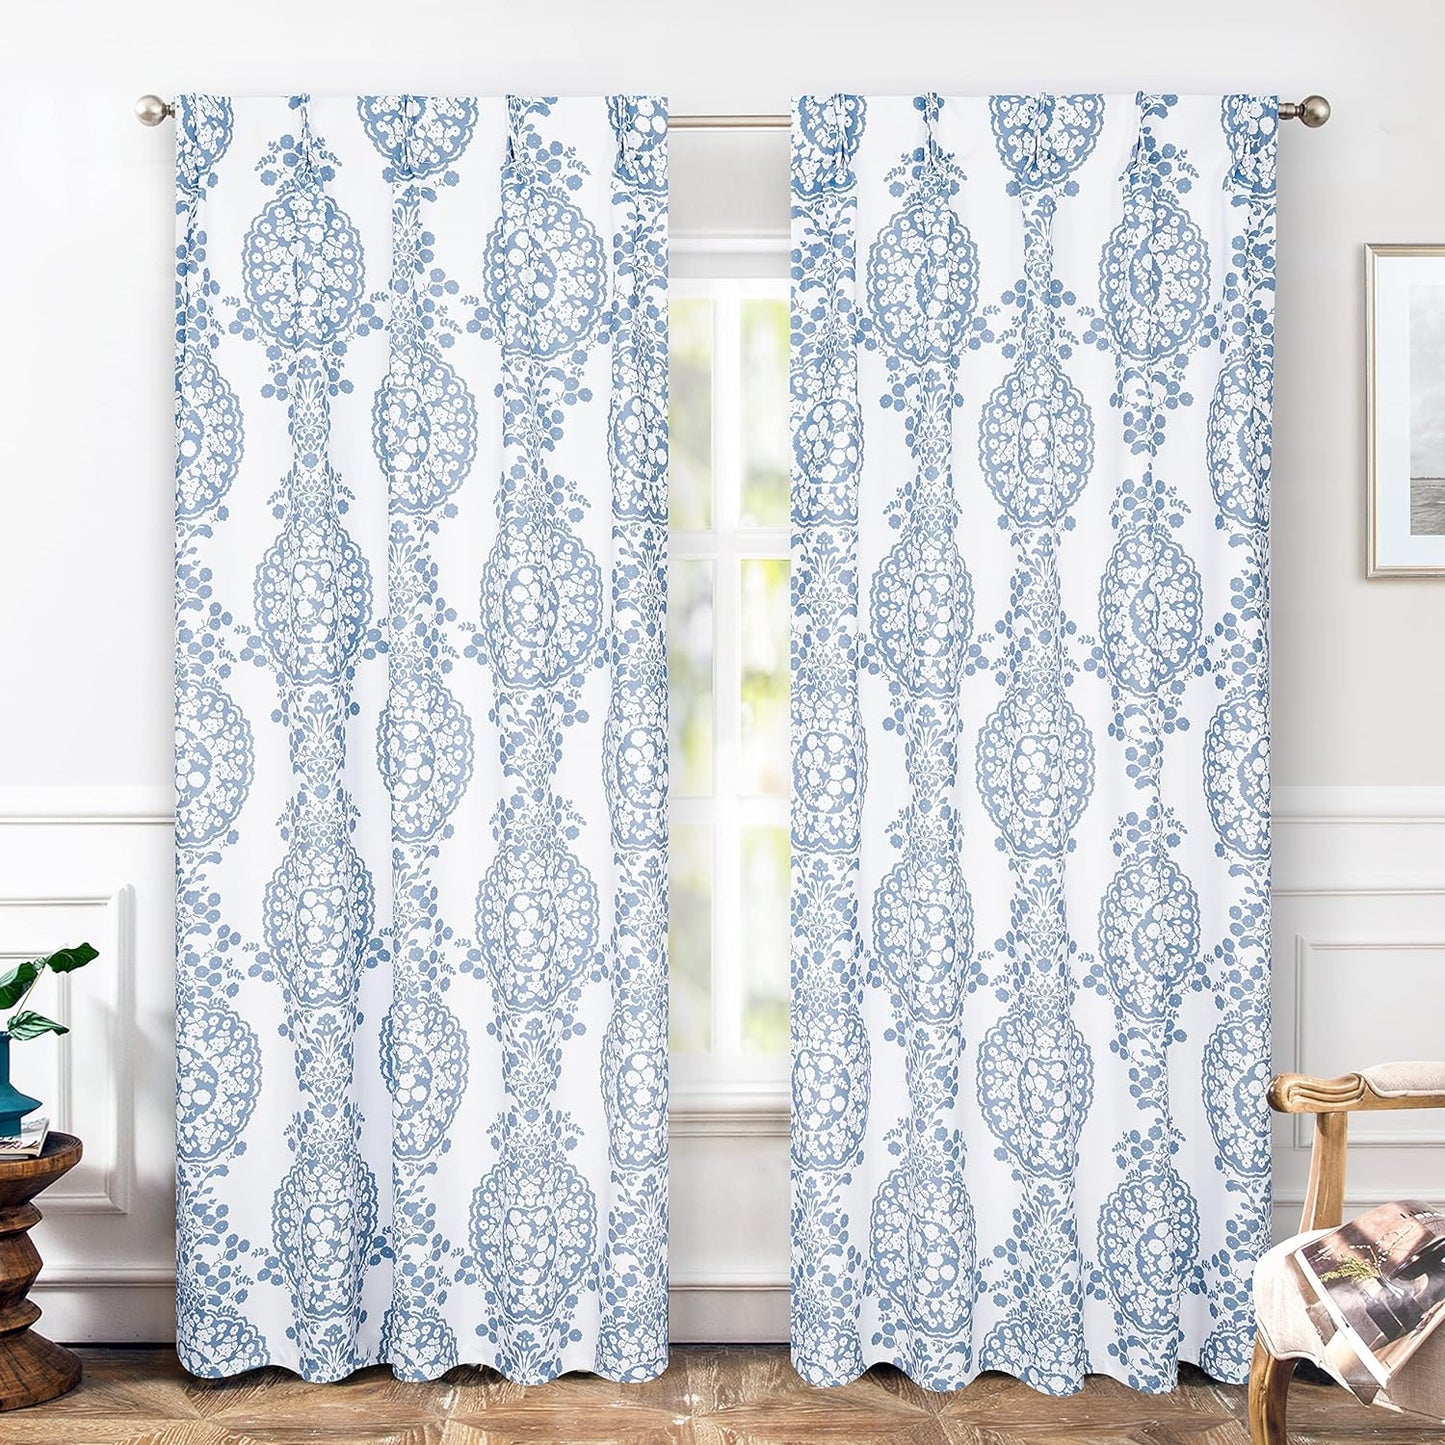 Driftaway Damask Curtains for Kitchen Bathroom Laundry Room Small Windows Floral Damask Medallion Patterned Adjustable Tie up Curtain Single 45 Inch by 63 Inch Dusty Blue  DriftAway Blue (12)30"X84"(Curtains) 